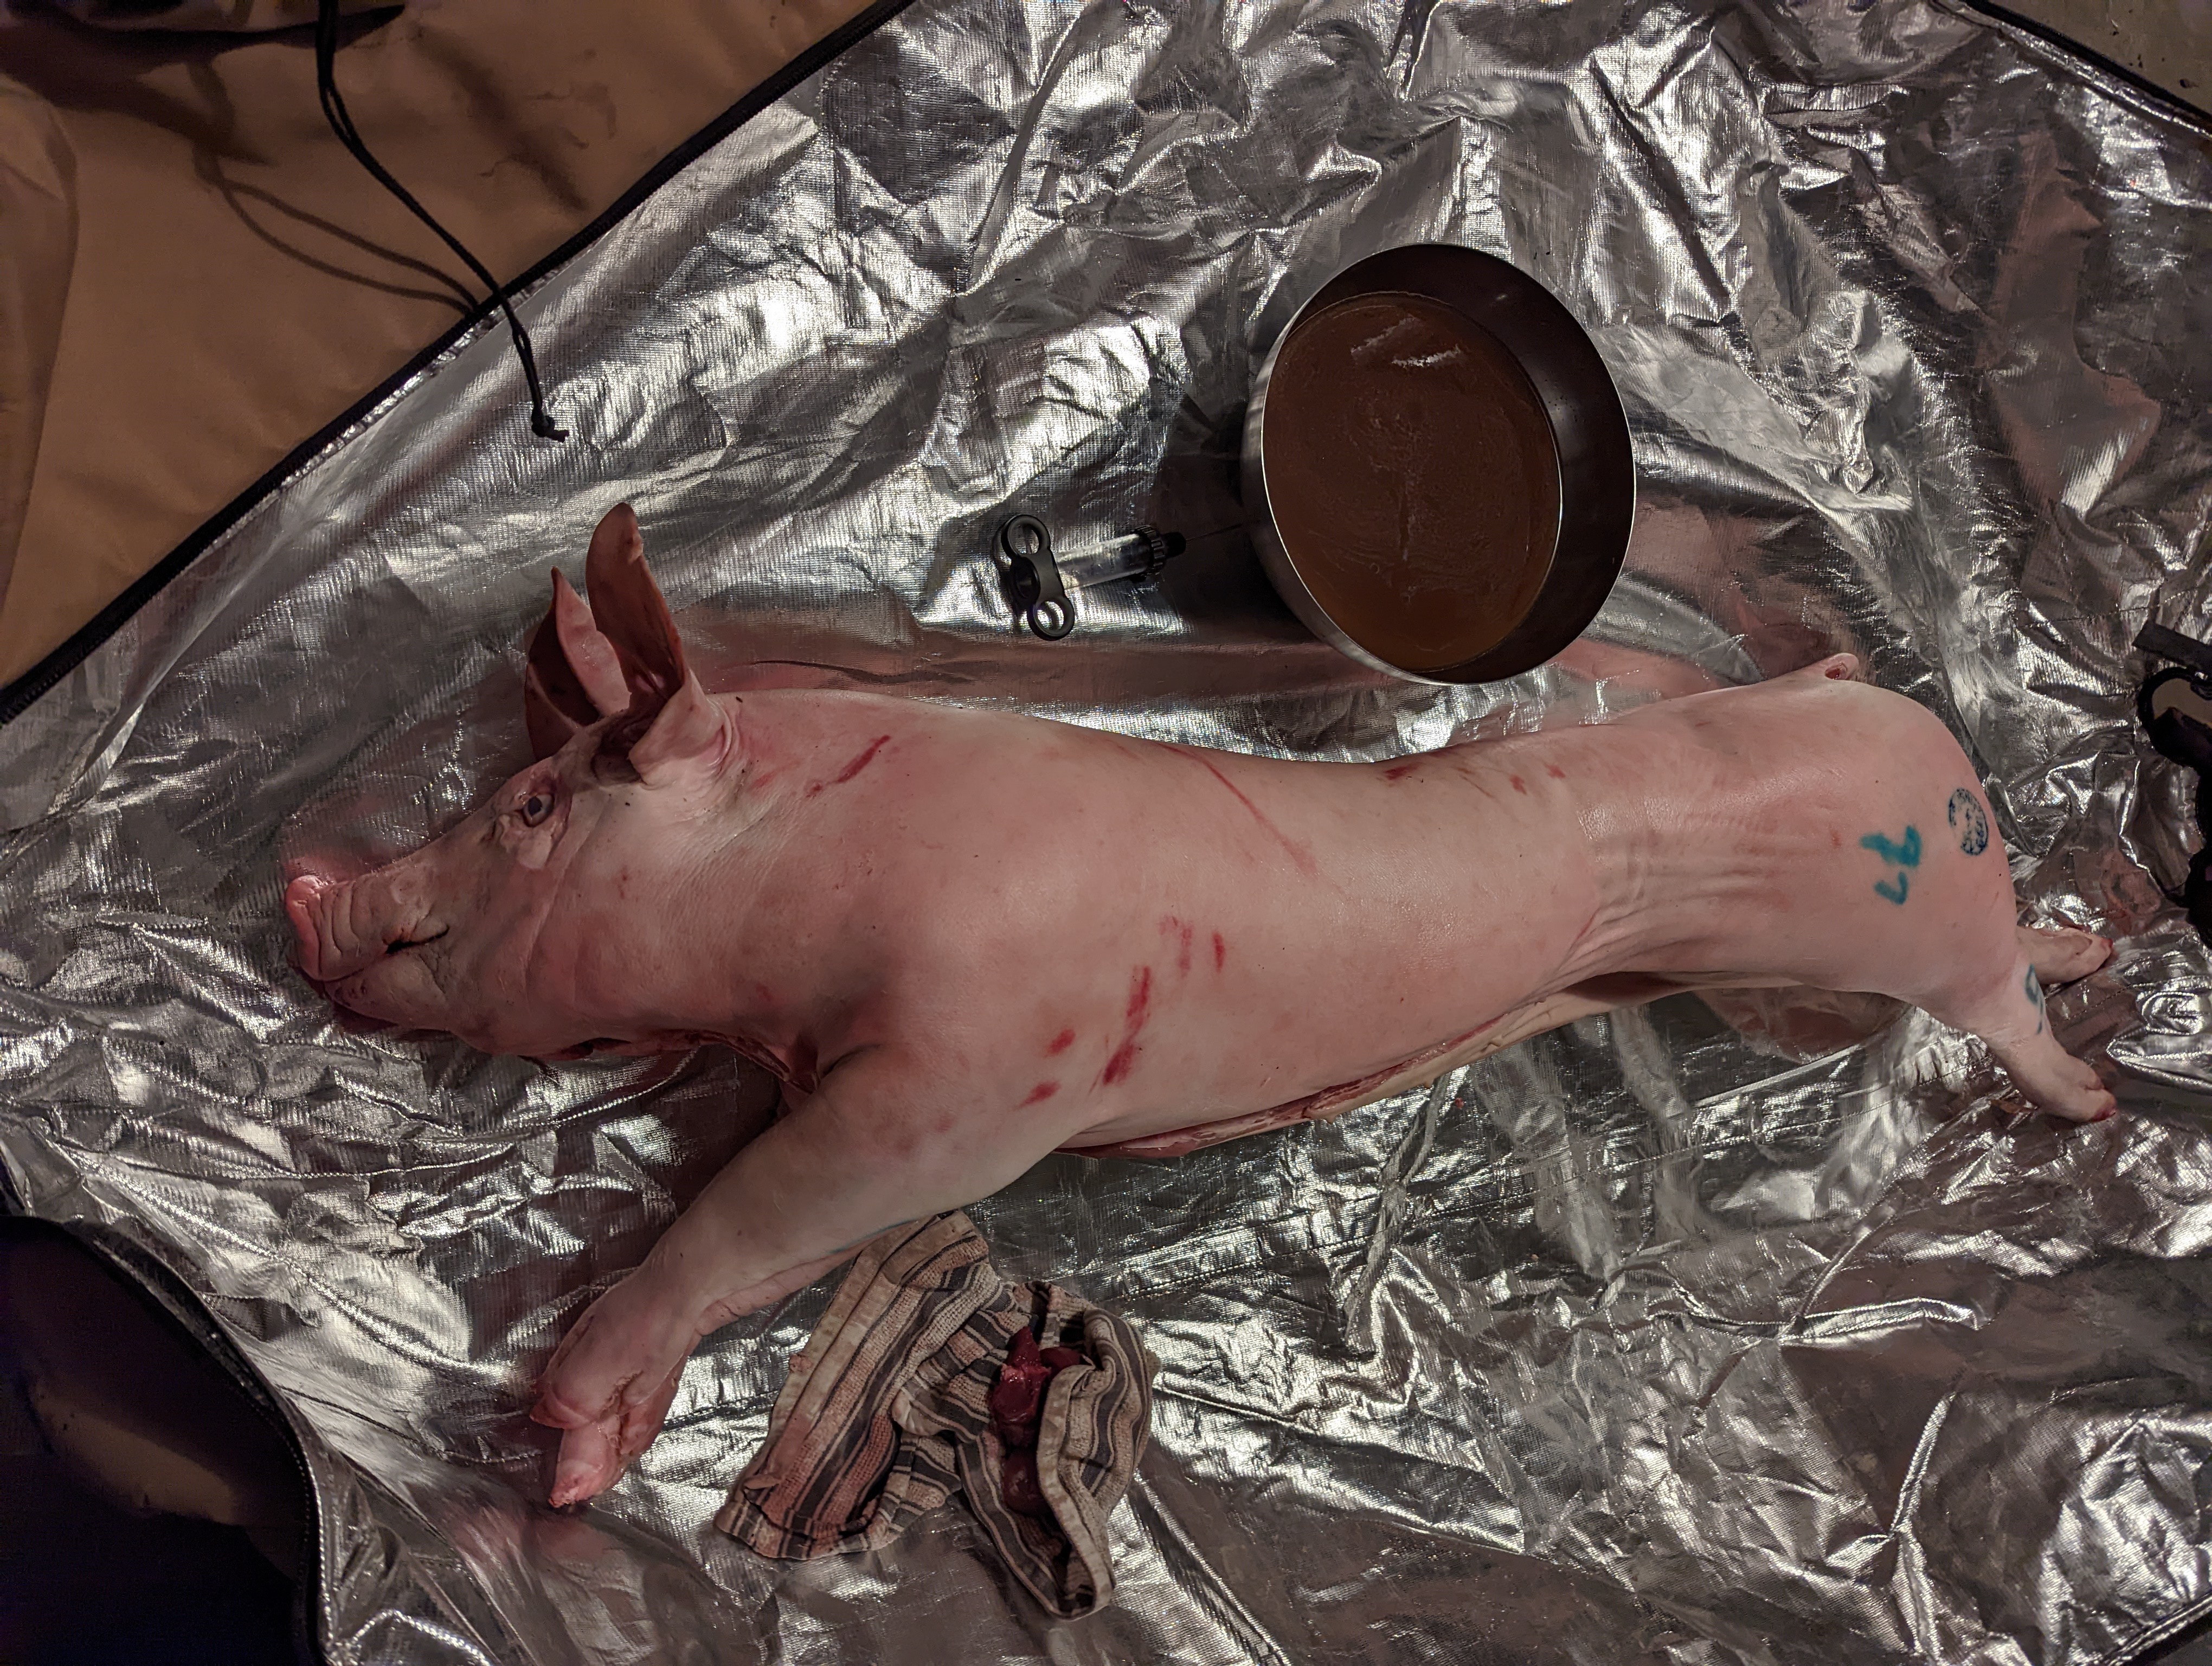 The pig getting injected with the marinade